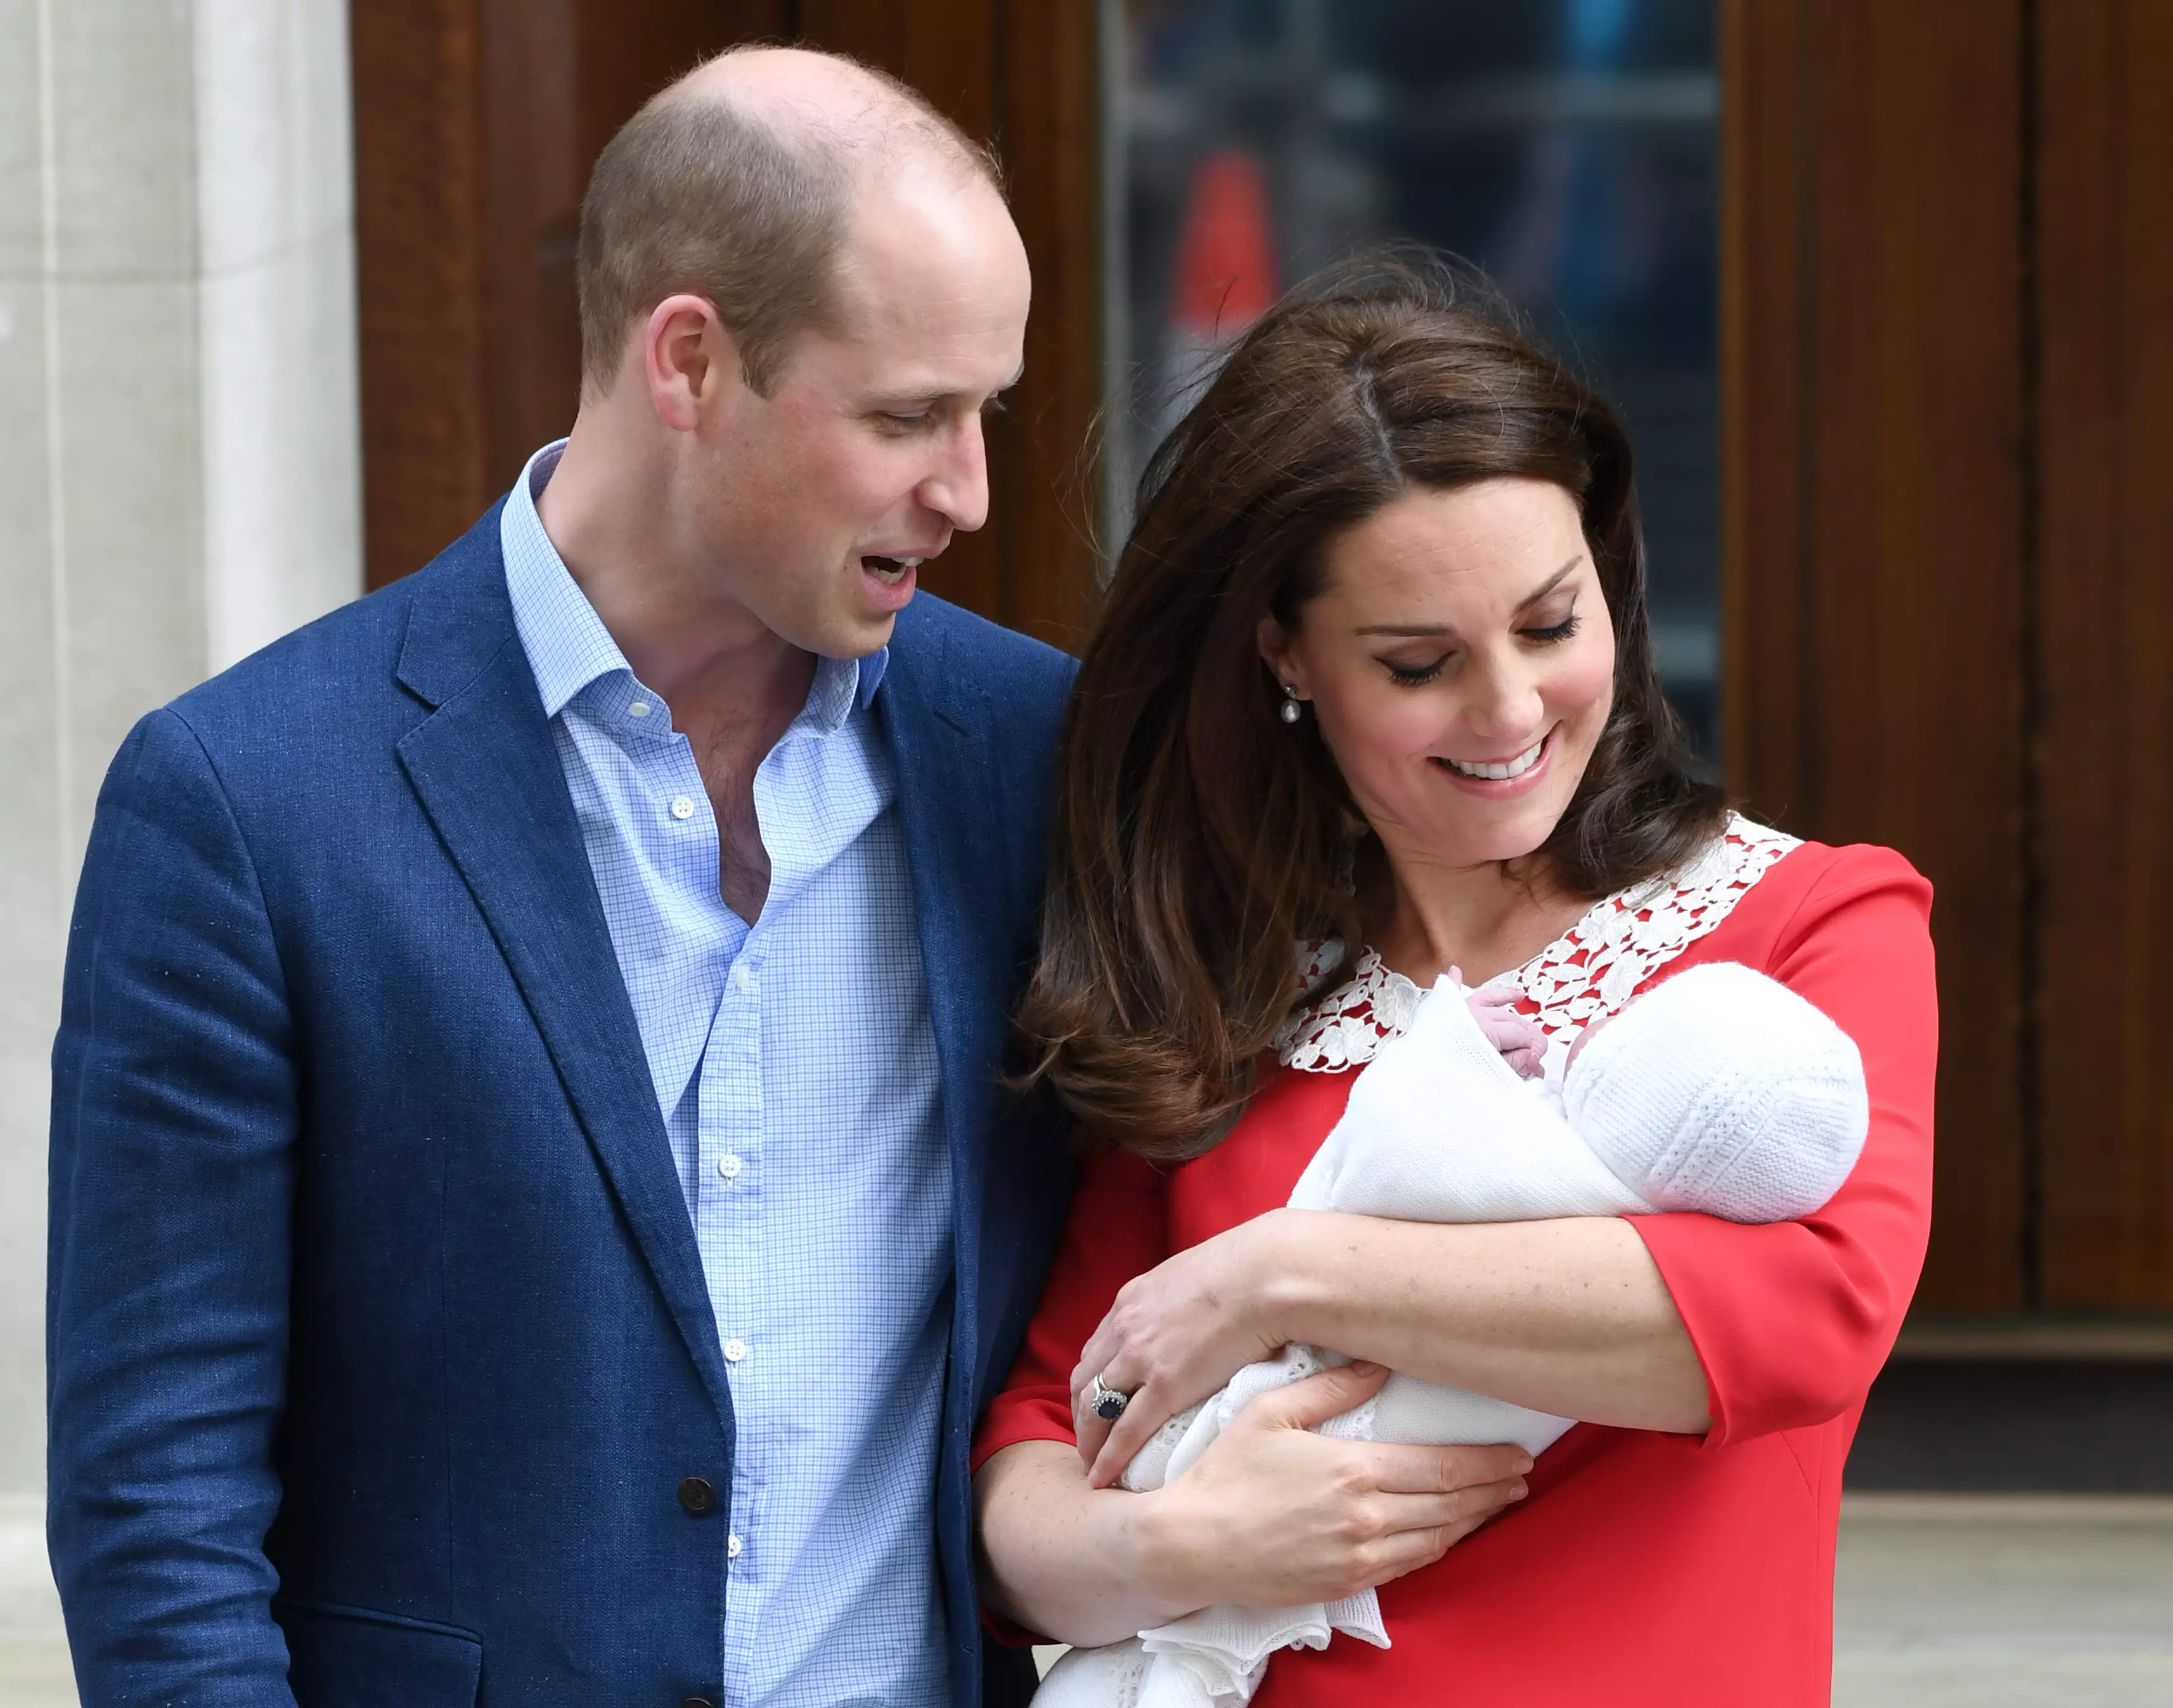 A similar discovery was made ahead of Prince Louis' birth last year.